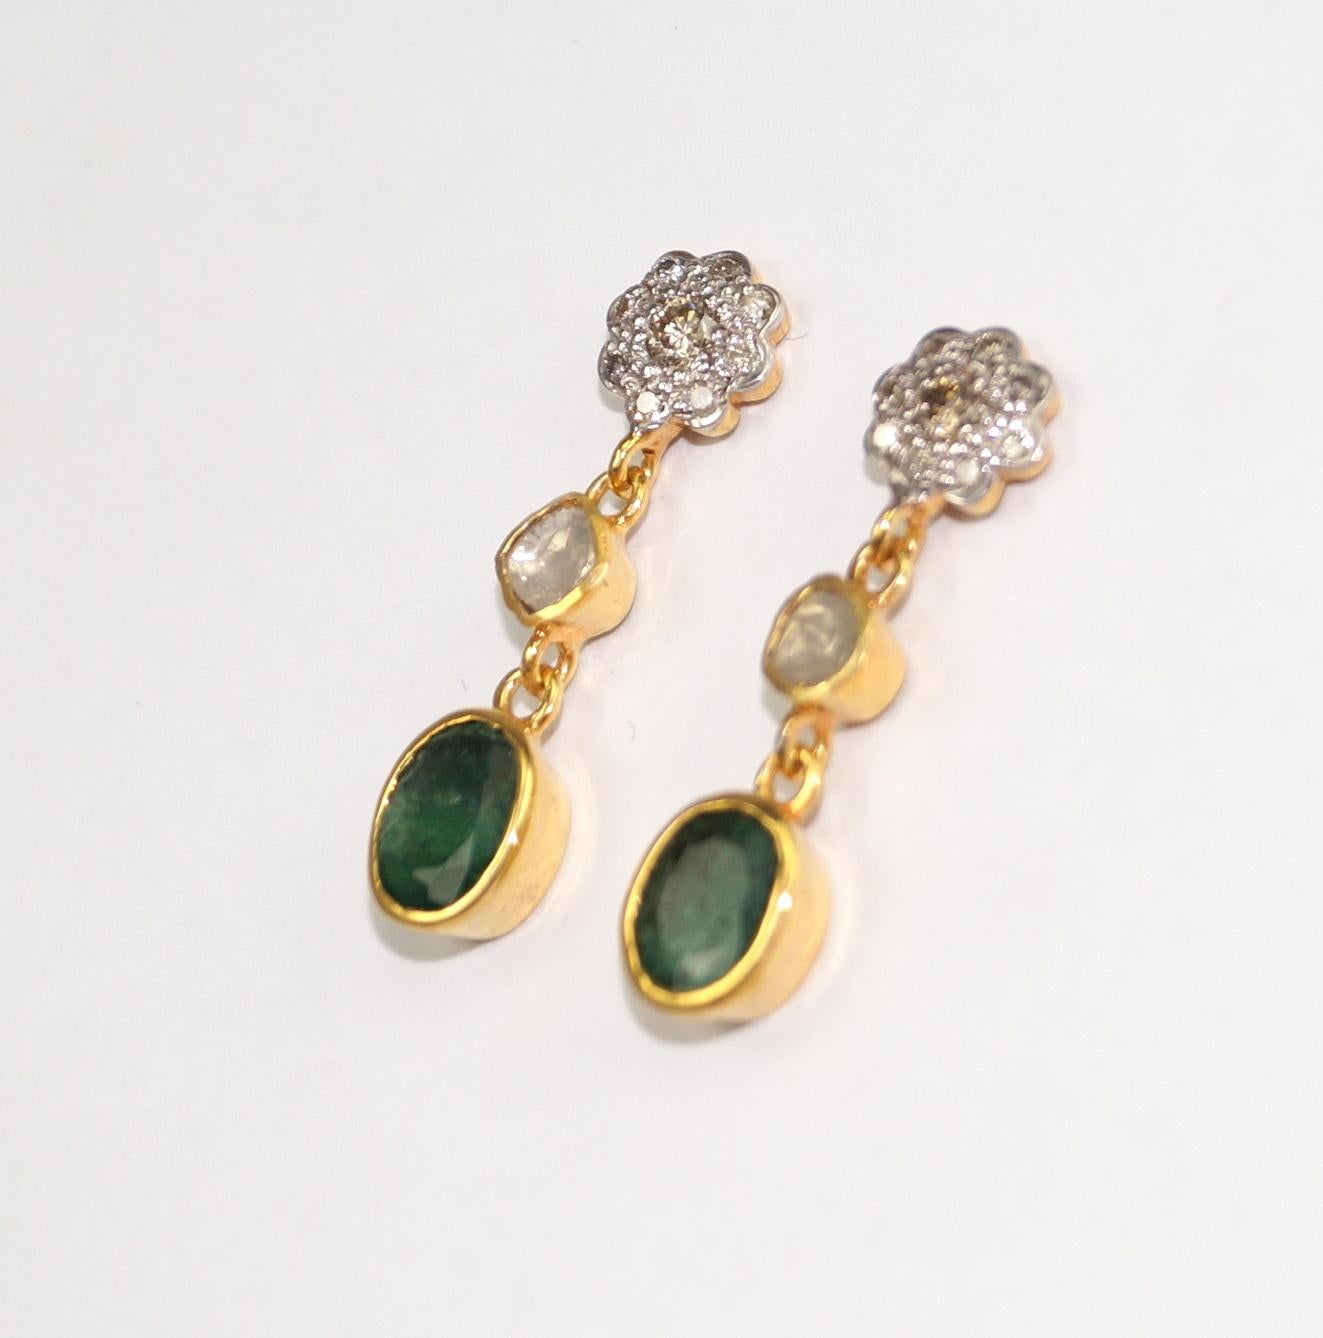 Handmade natural uncut rose cut diamonds emeralds 925 silver earrings In New Condition For Sale In Delhi, DL